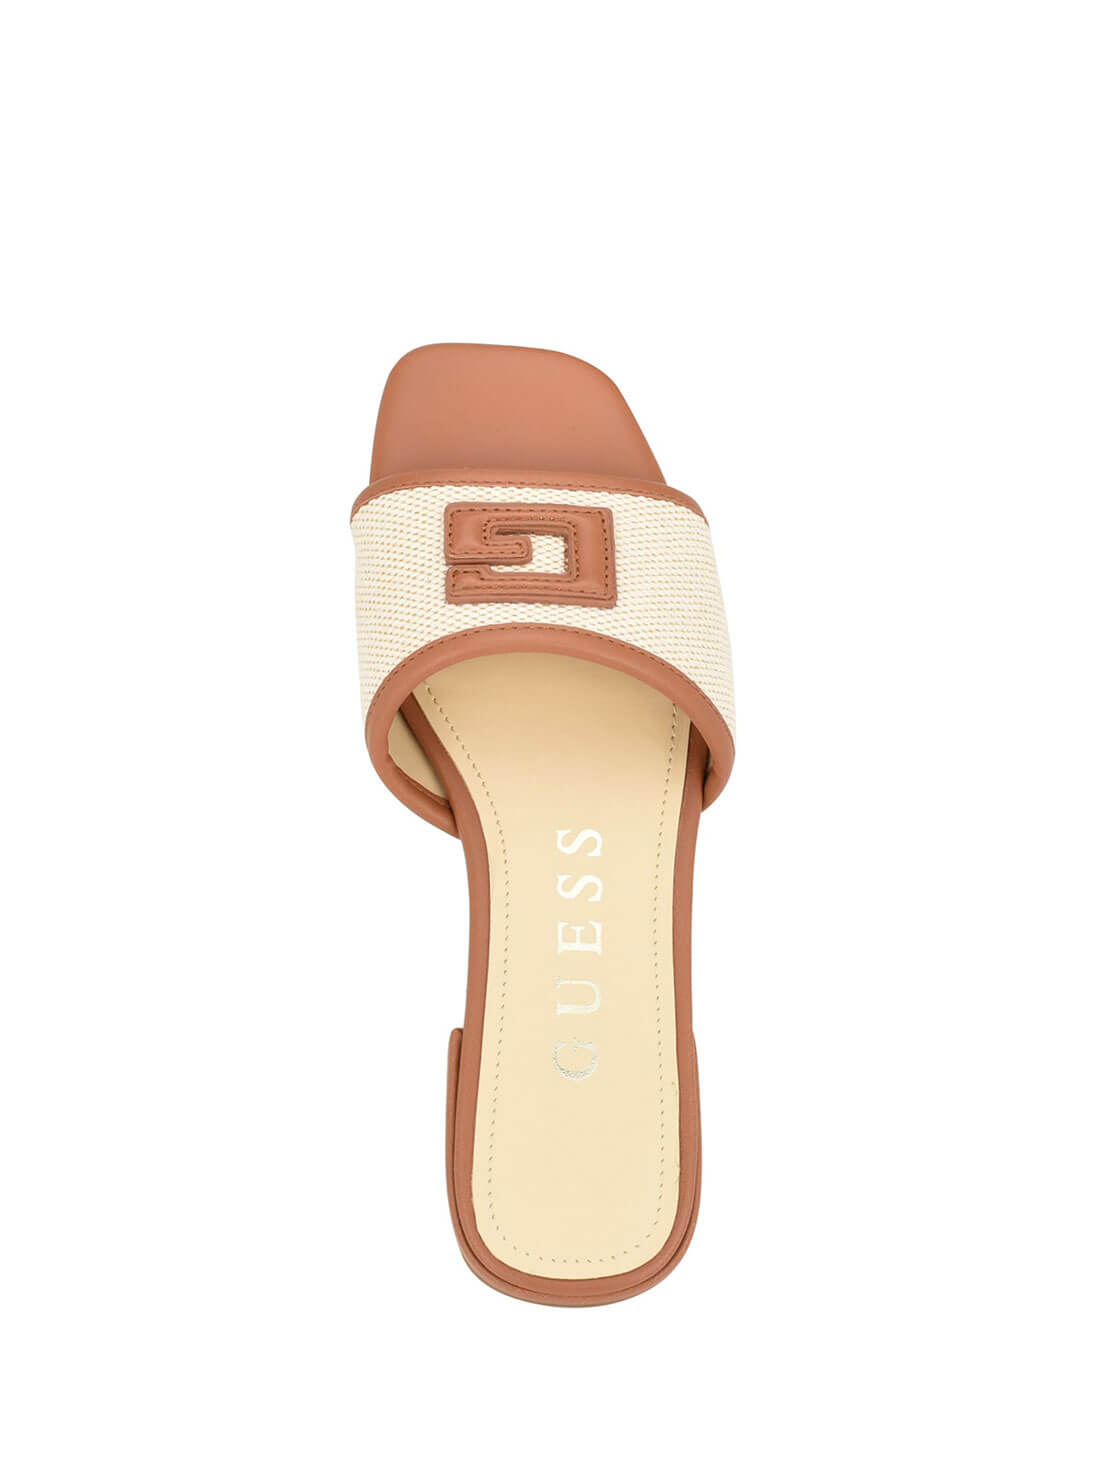 Tan Tampa Slide Sandals | GUESS Women's Shoes | top view